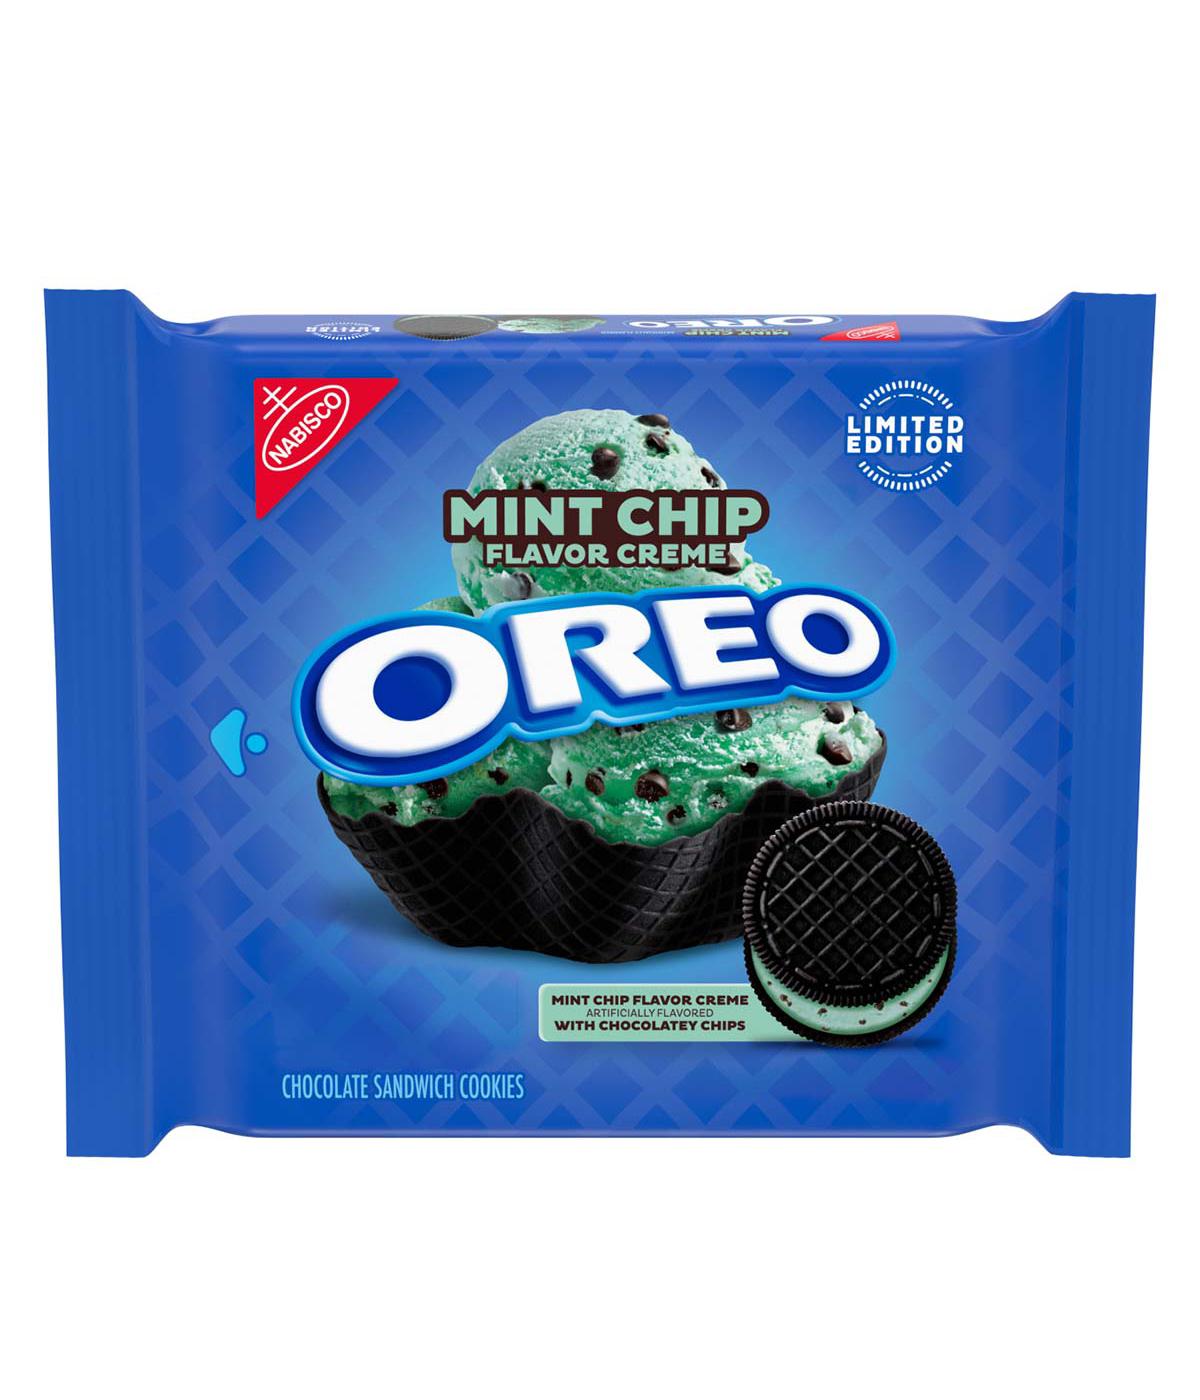 Nabisco Oreo Limited Edition Mint Chip Chocolate Sandwich Cookies; image 1 of 2